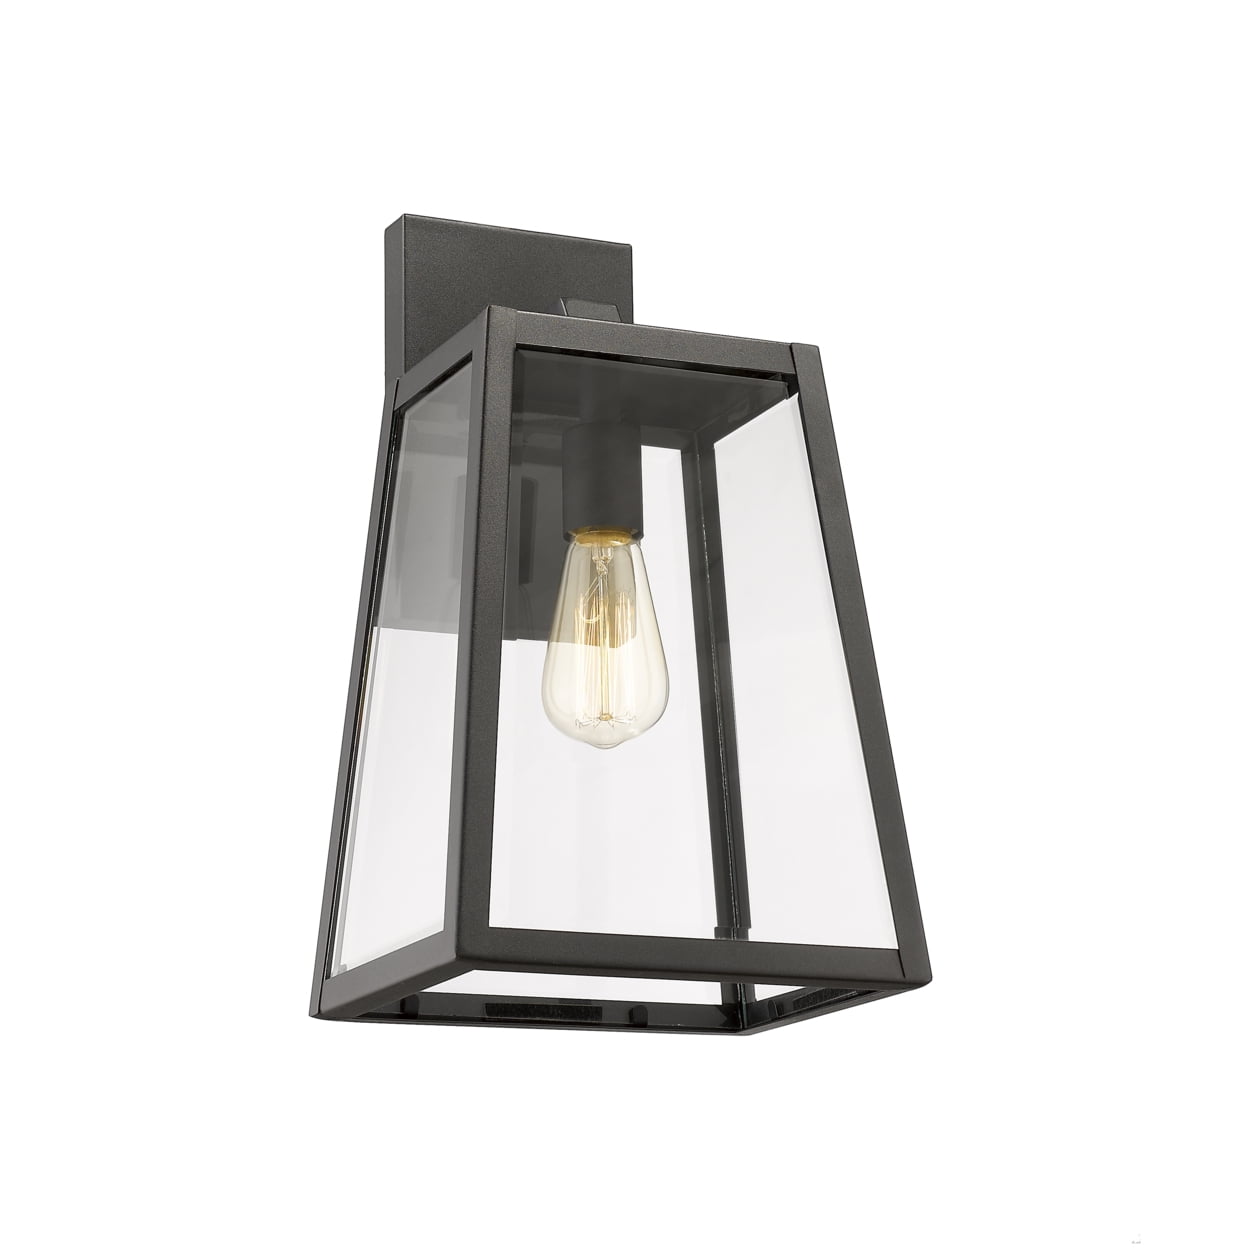 Ch22034bk16-od1 Xandra Industrial 1 Light Textured Black Outdoor Wall Sconce - 16 In.